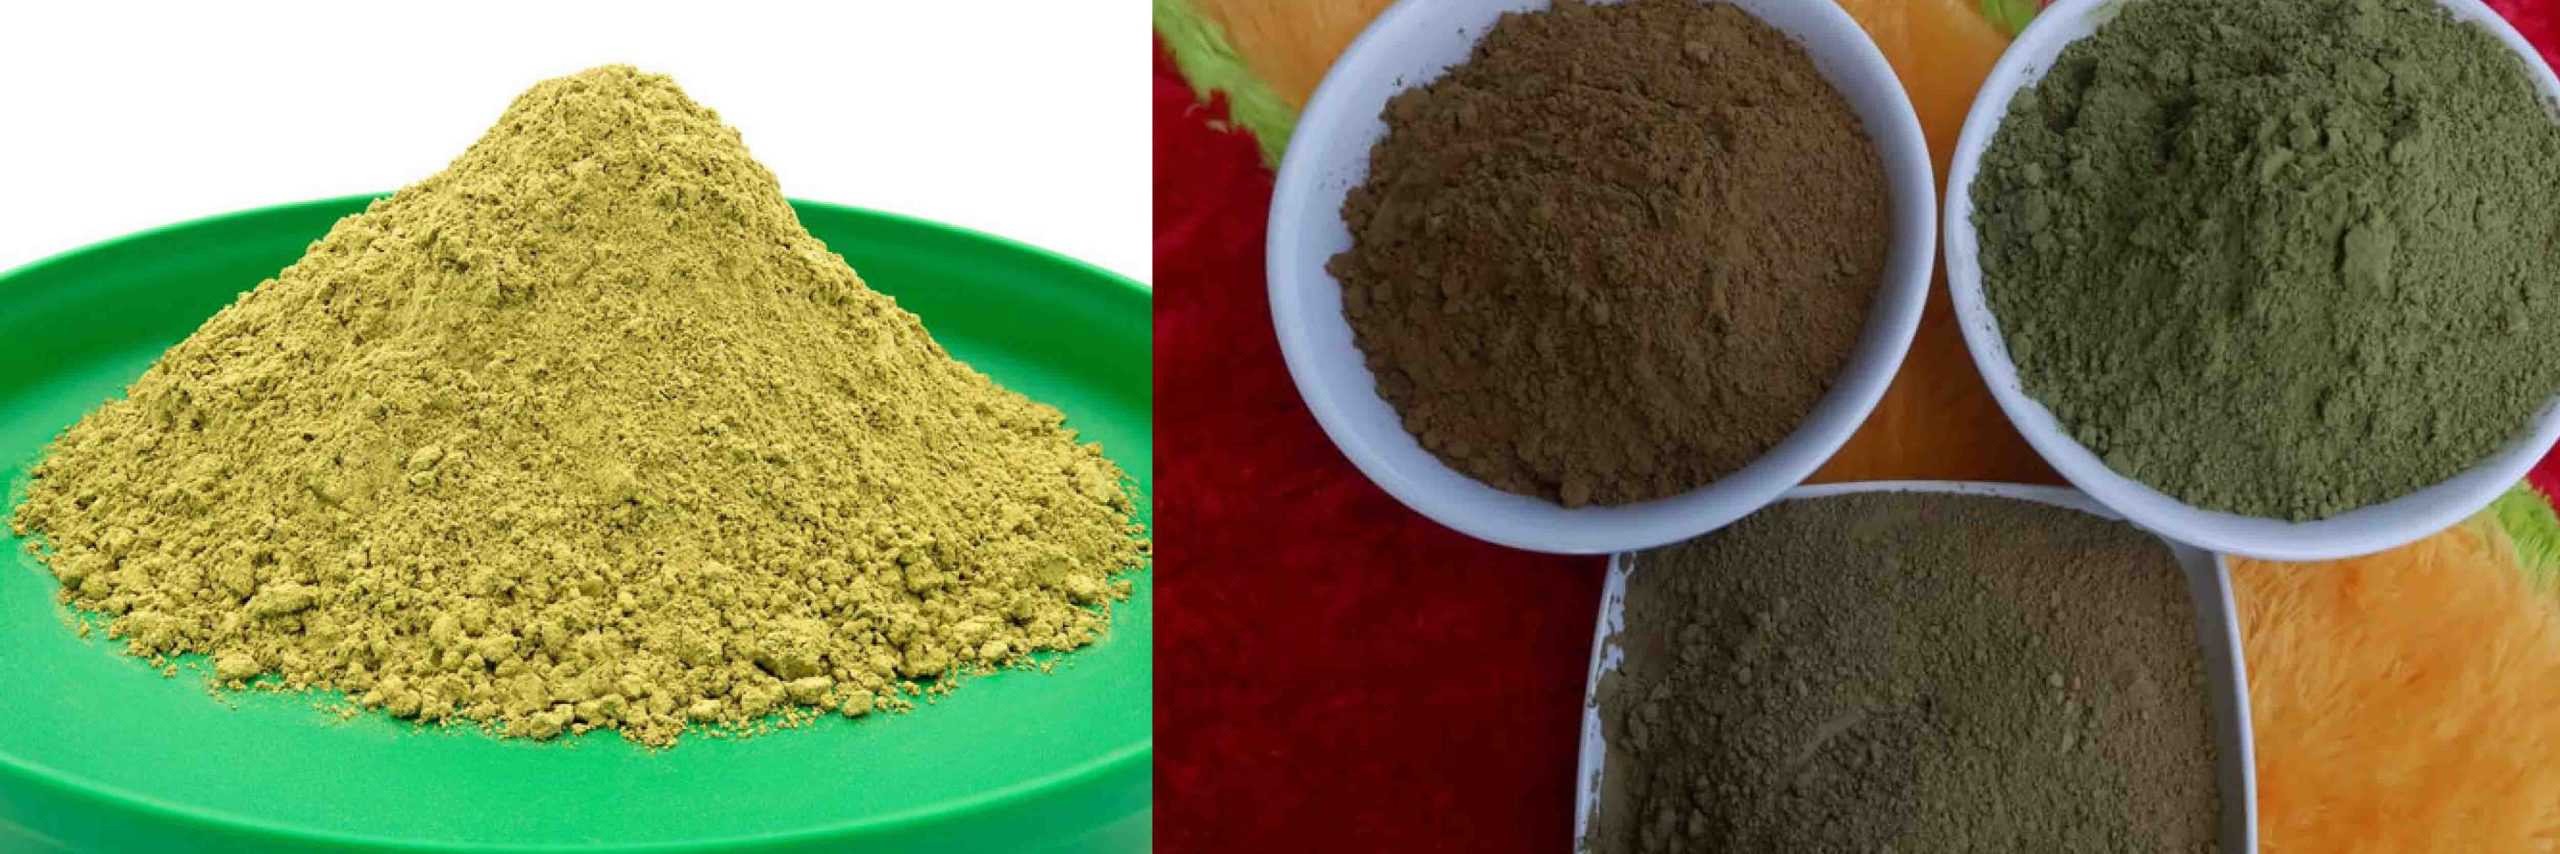 picture-of-different-type-of-kratom-strains